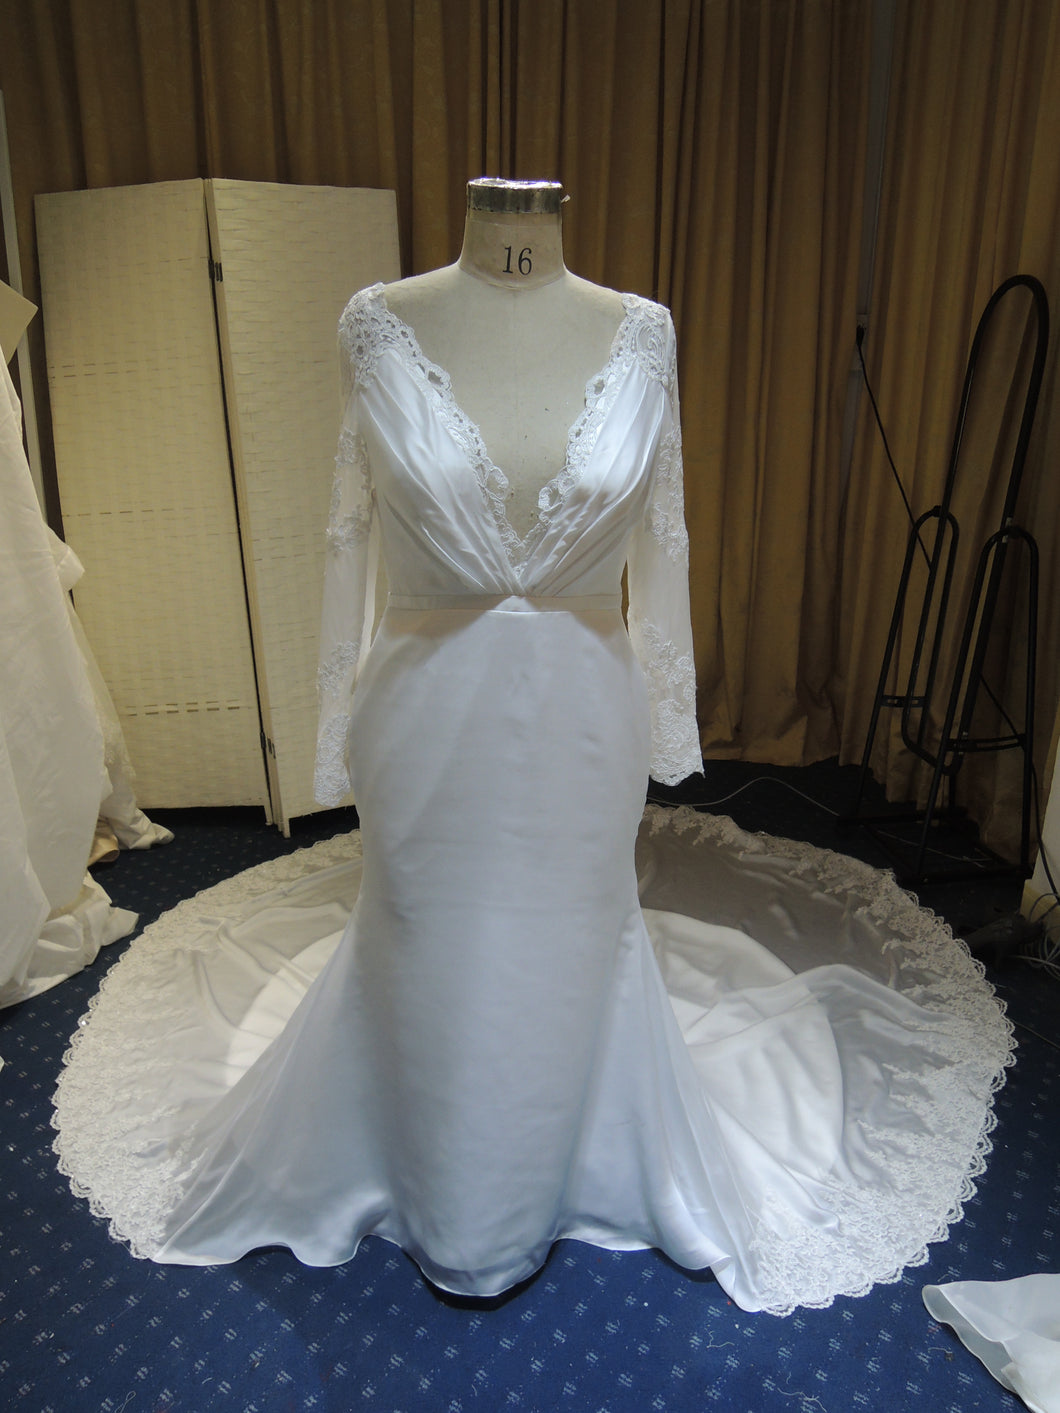 Replica of long sleeve v-neck wedding gown